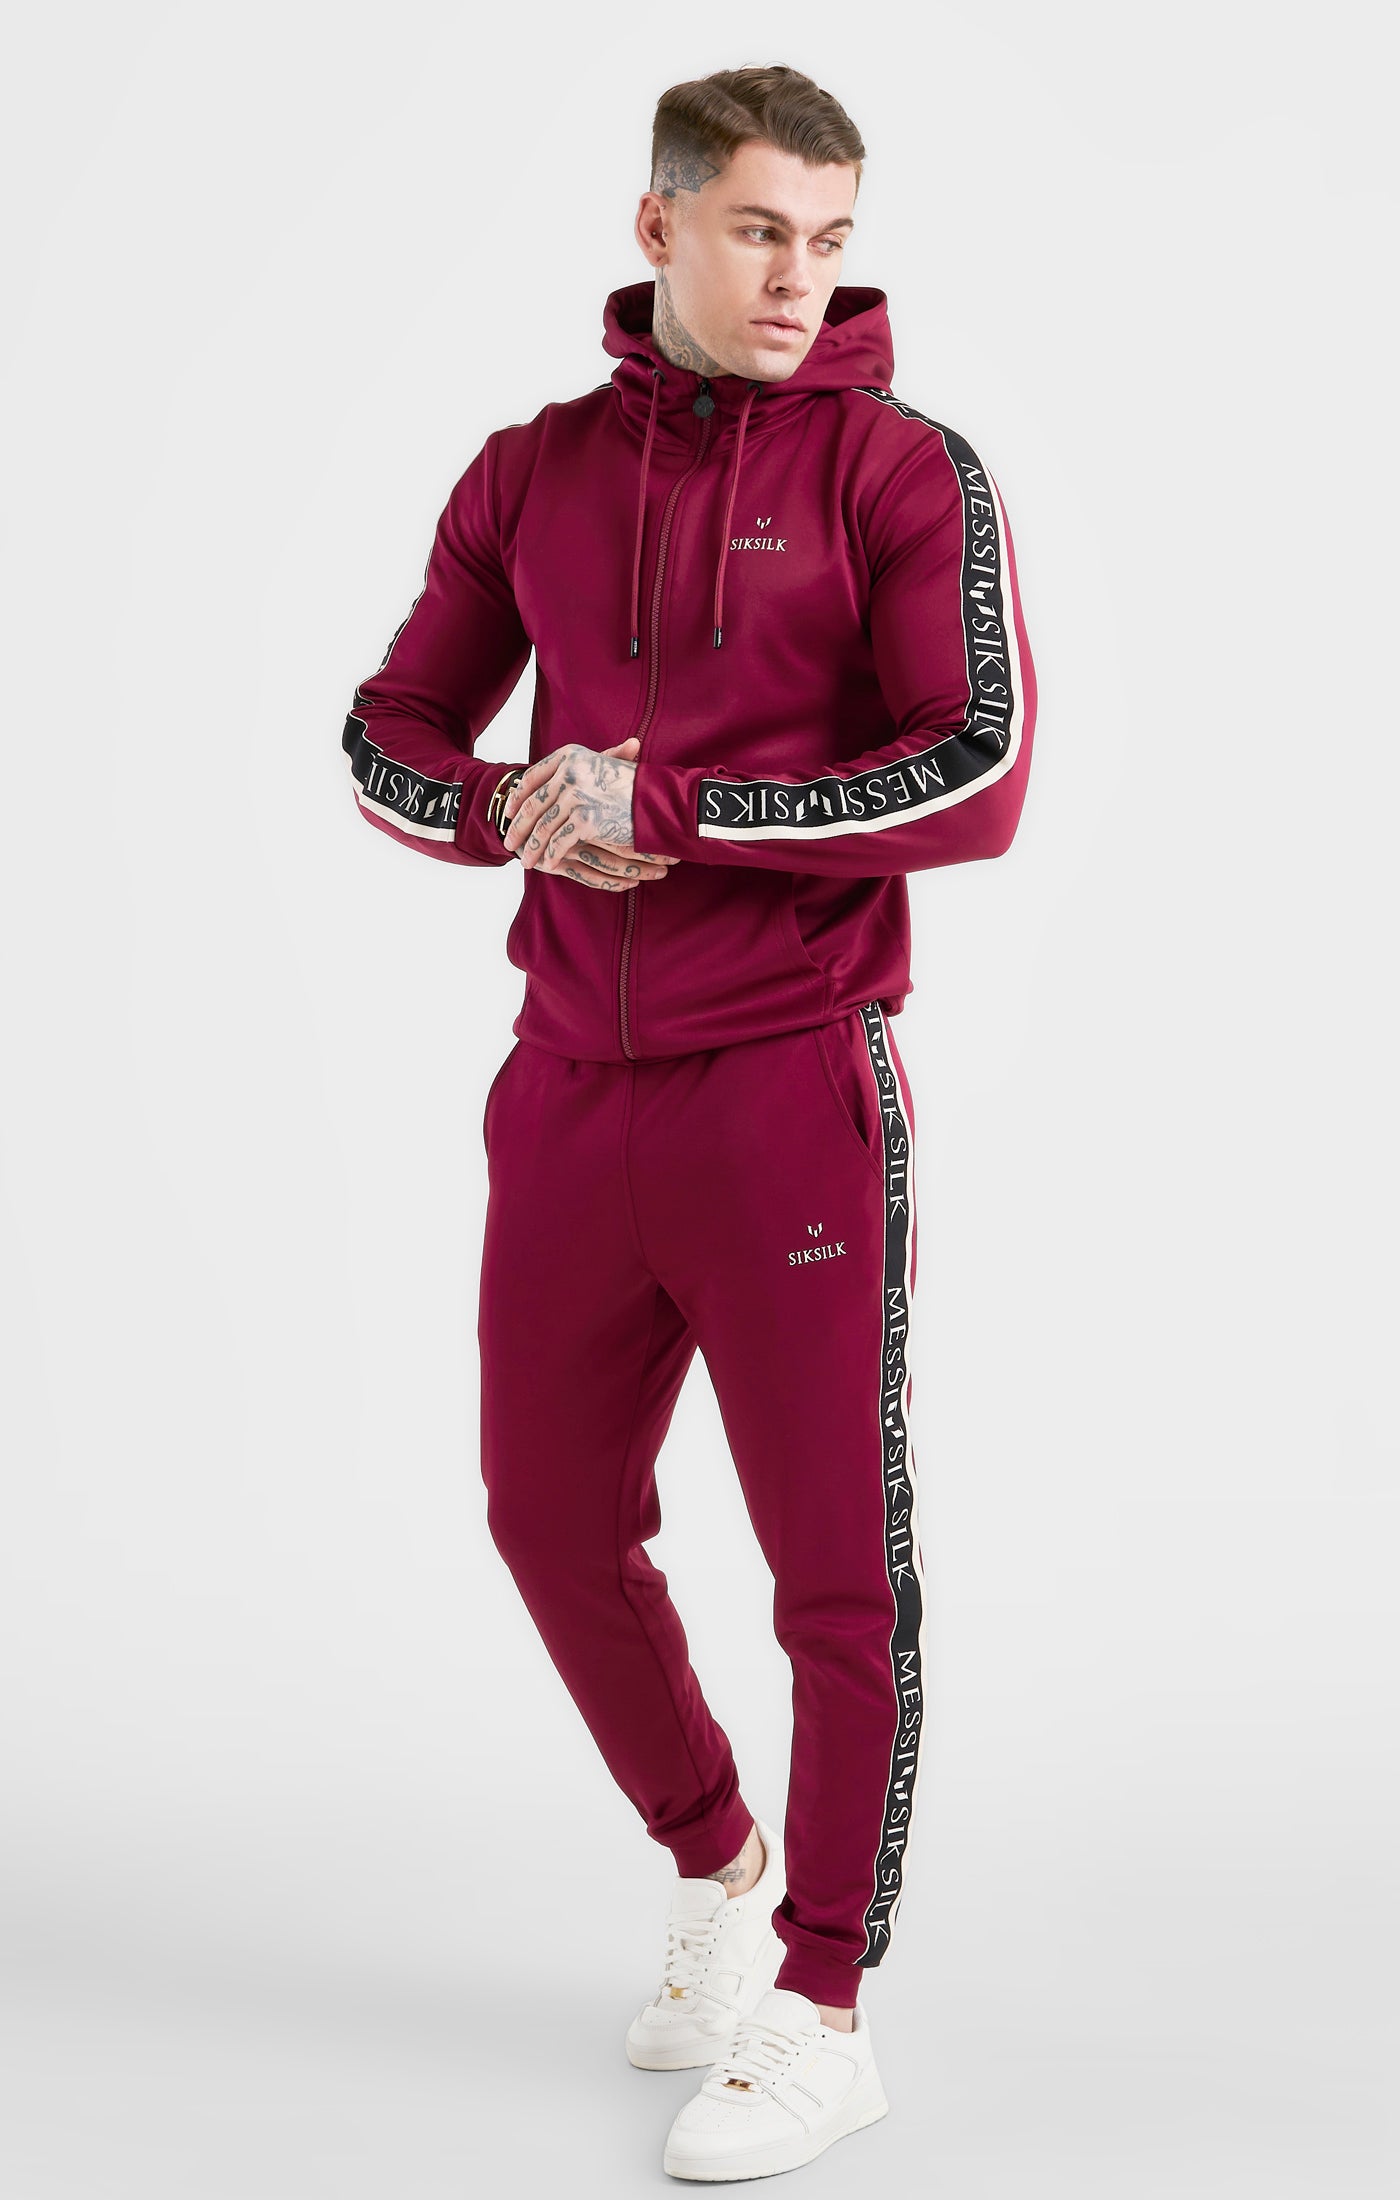 Load image into Gallery viewer, Messi x SikSilk Taped Pant - Burgundy (2)